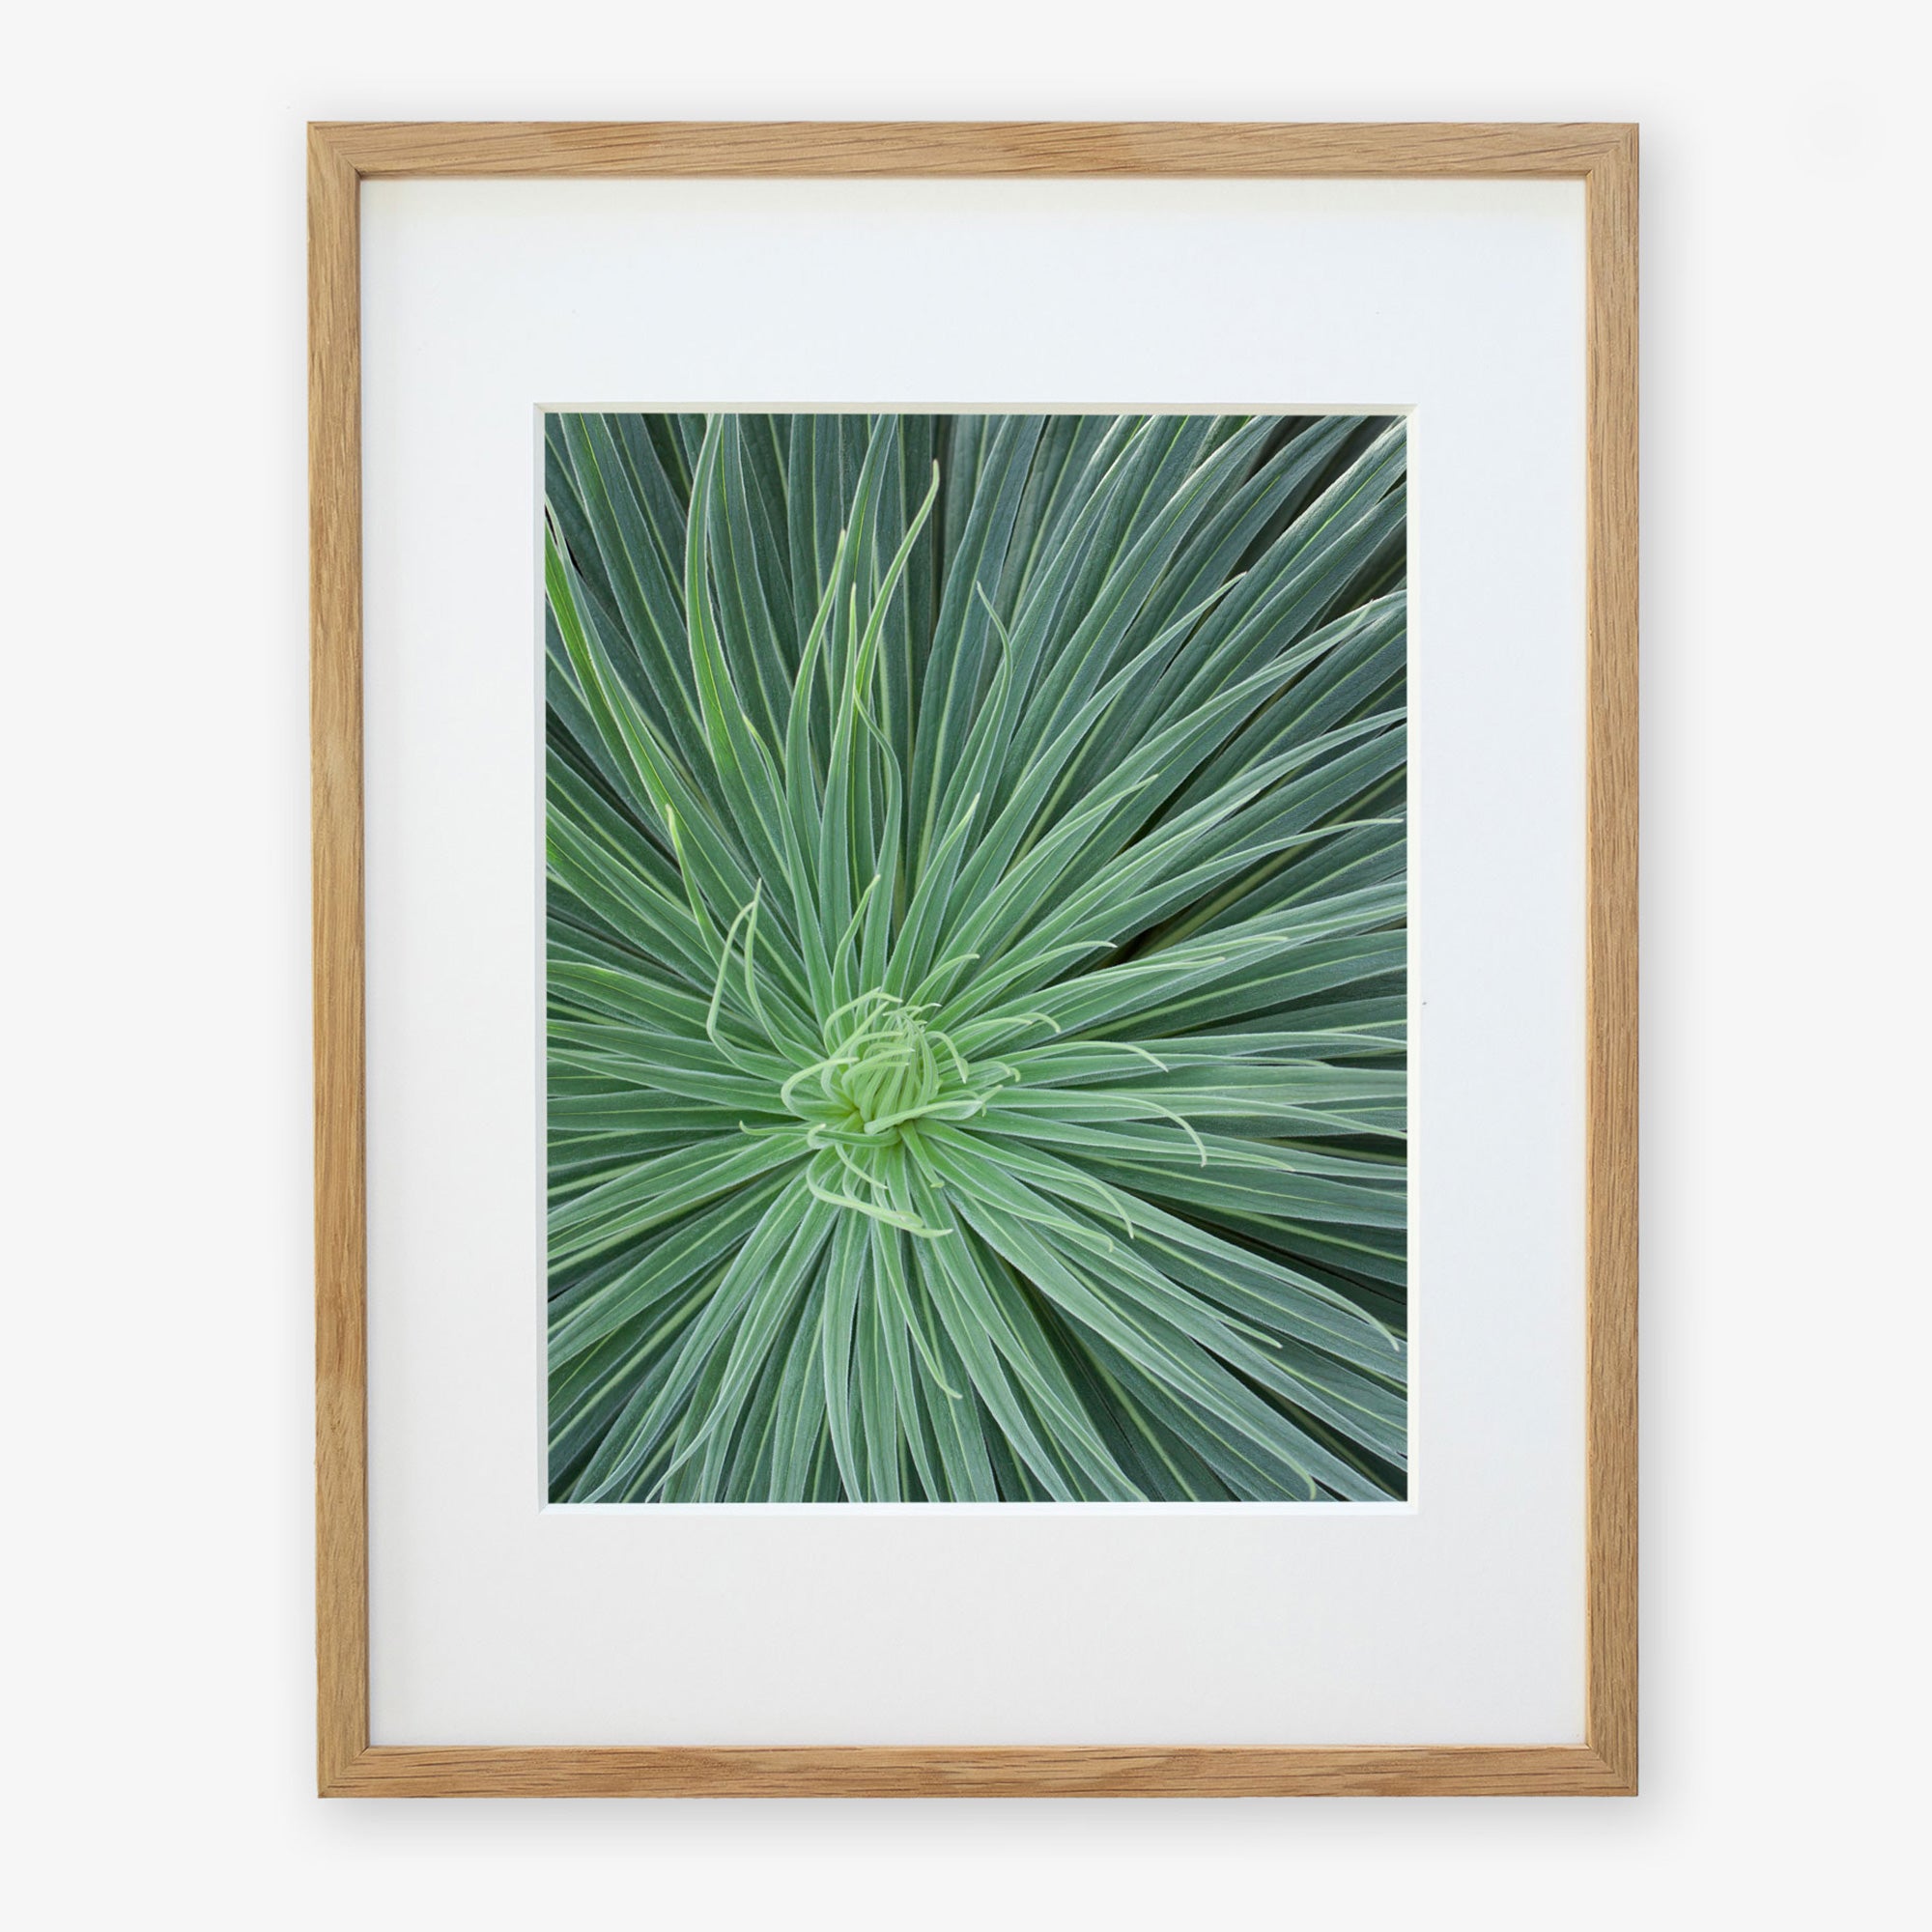 A framed photograph of the Offley Green &#39;Desert Fireworks II&#39; green succulent desert plant with long, thin leaves radiating from the center, displayed against a white background within a light wooden frame.